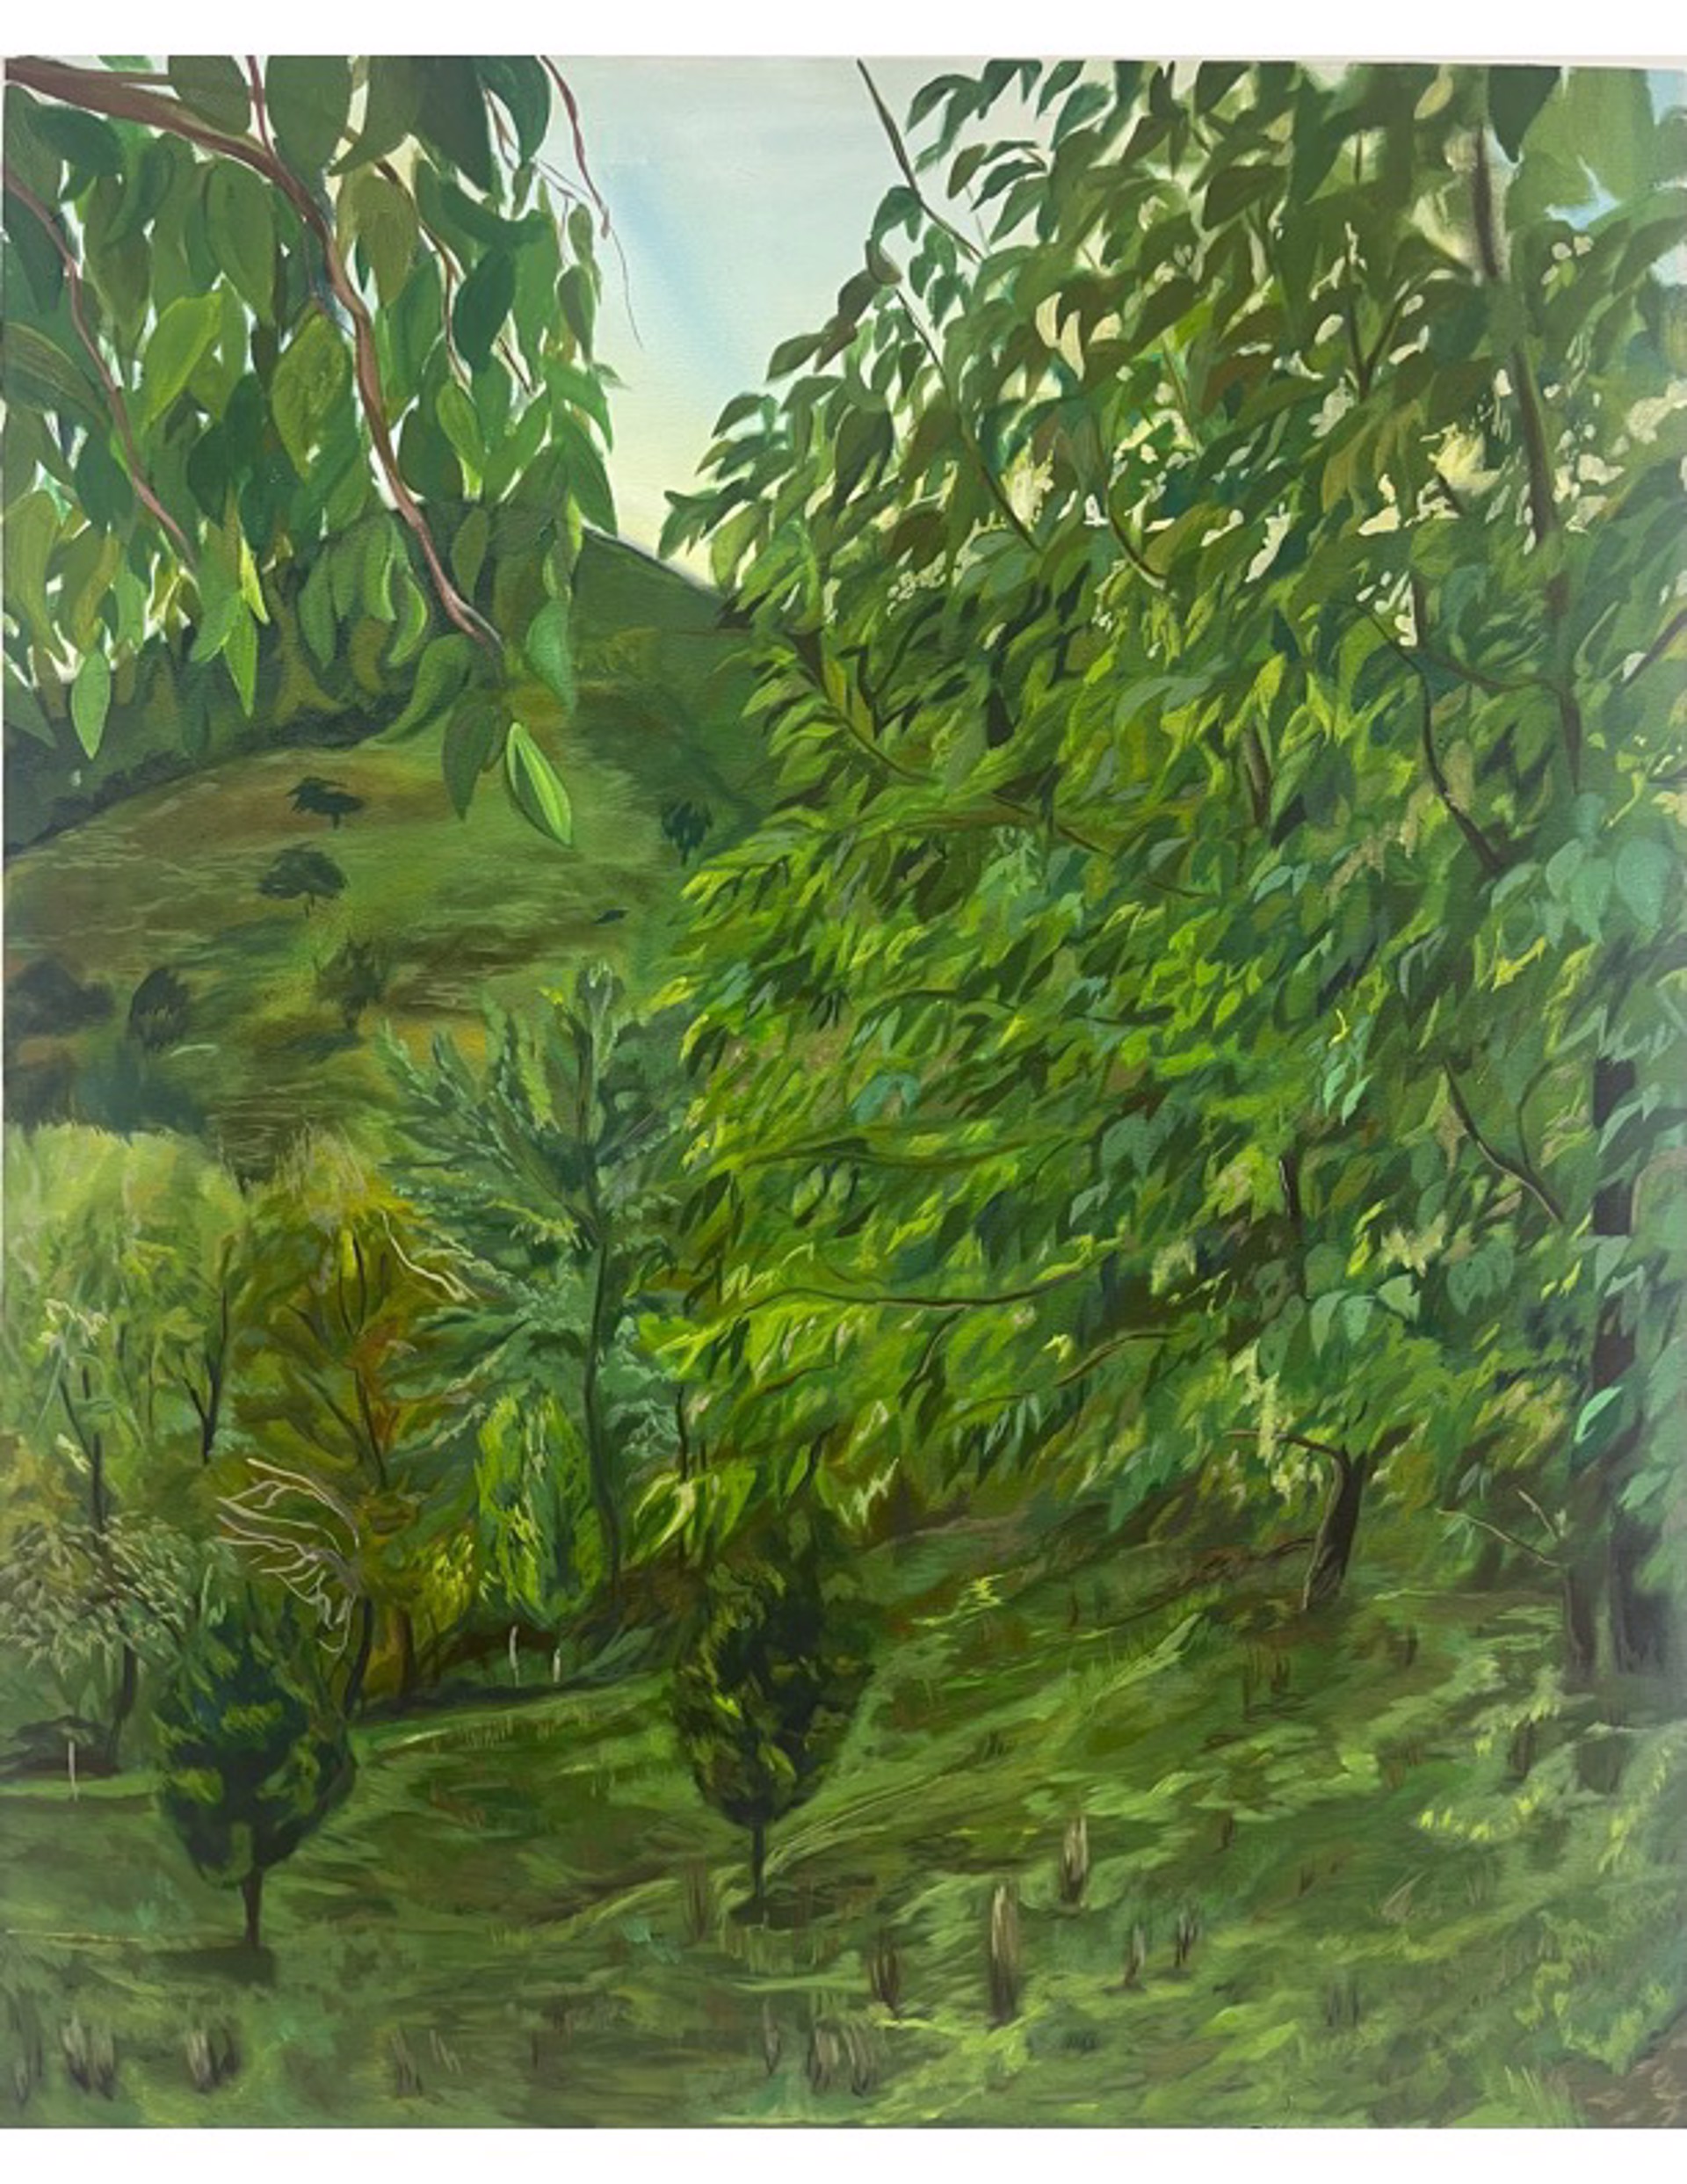 View over the Orchard by Bella Kimmel